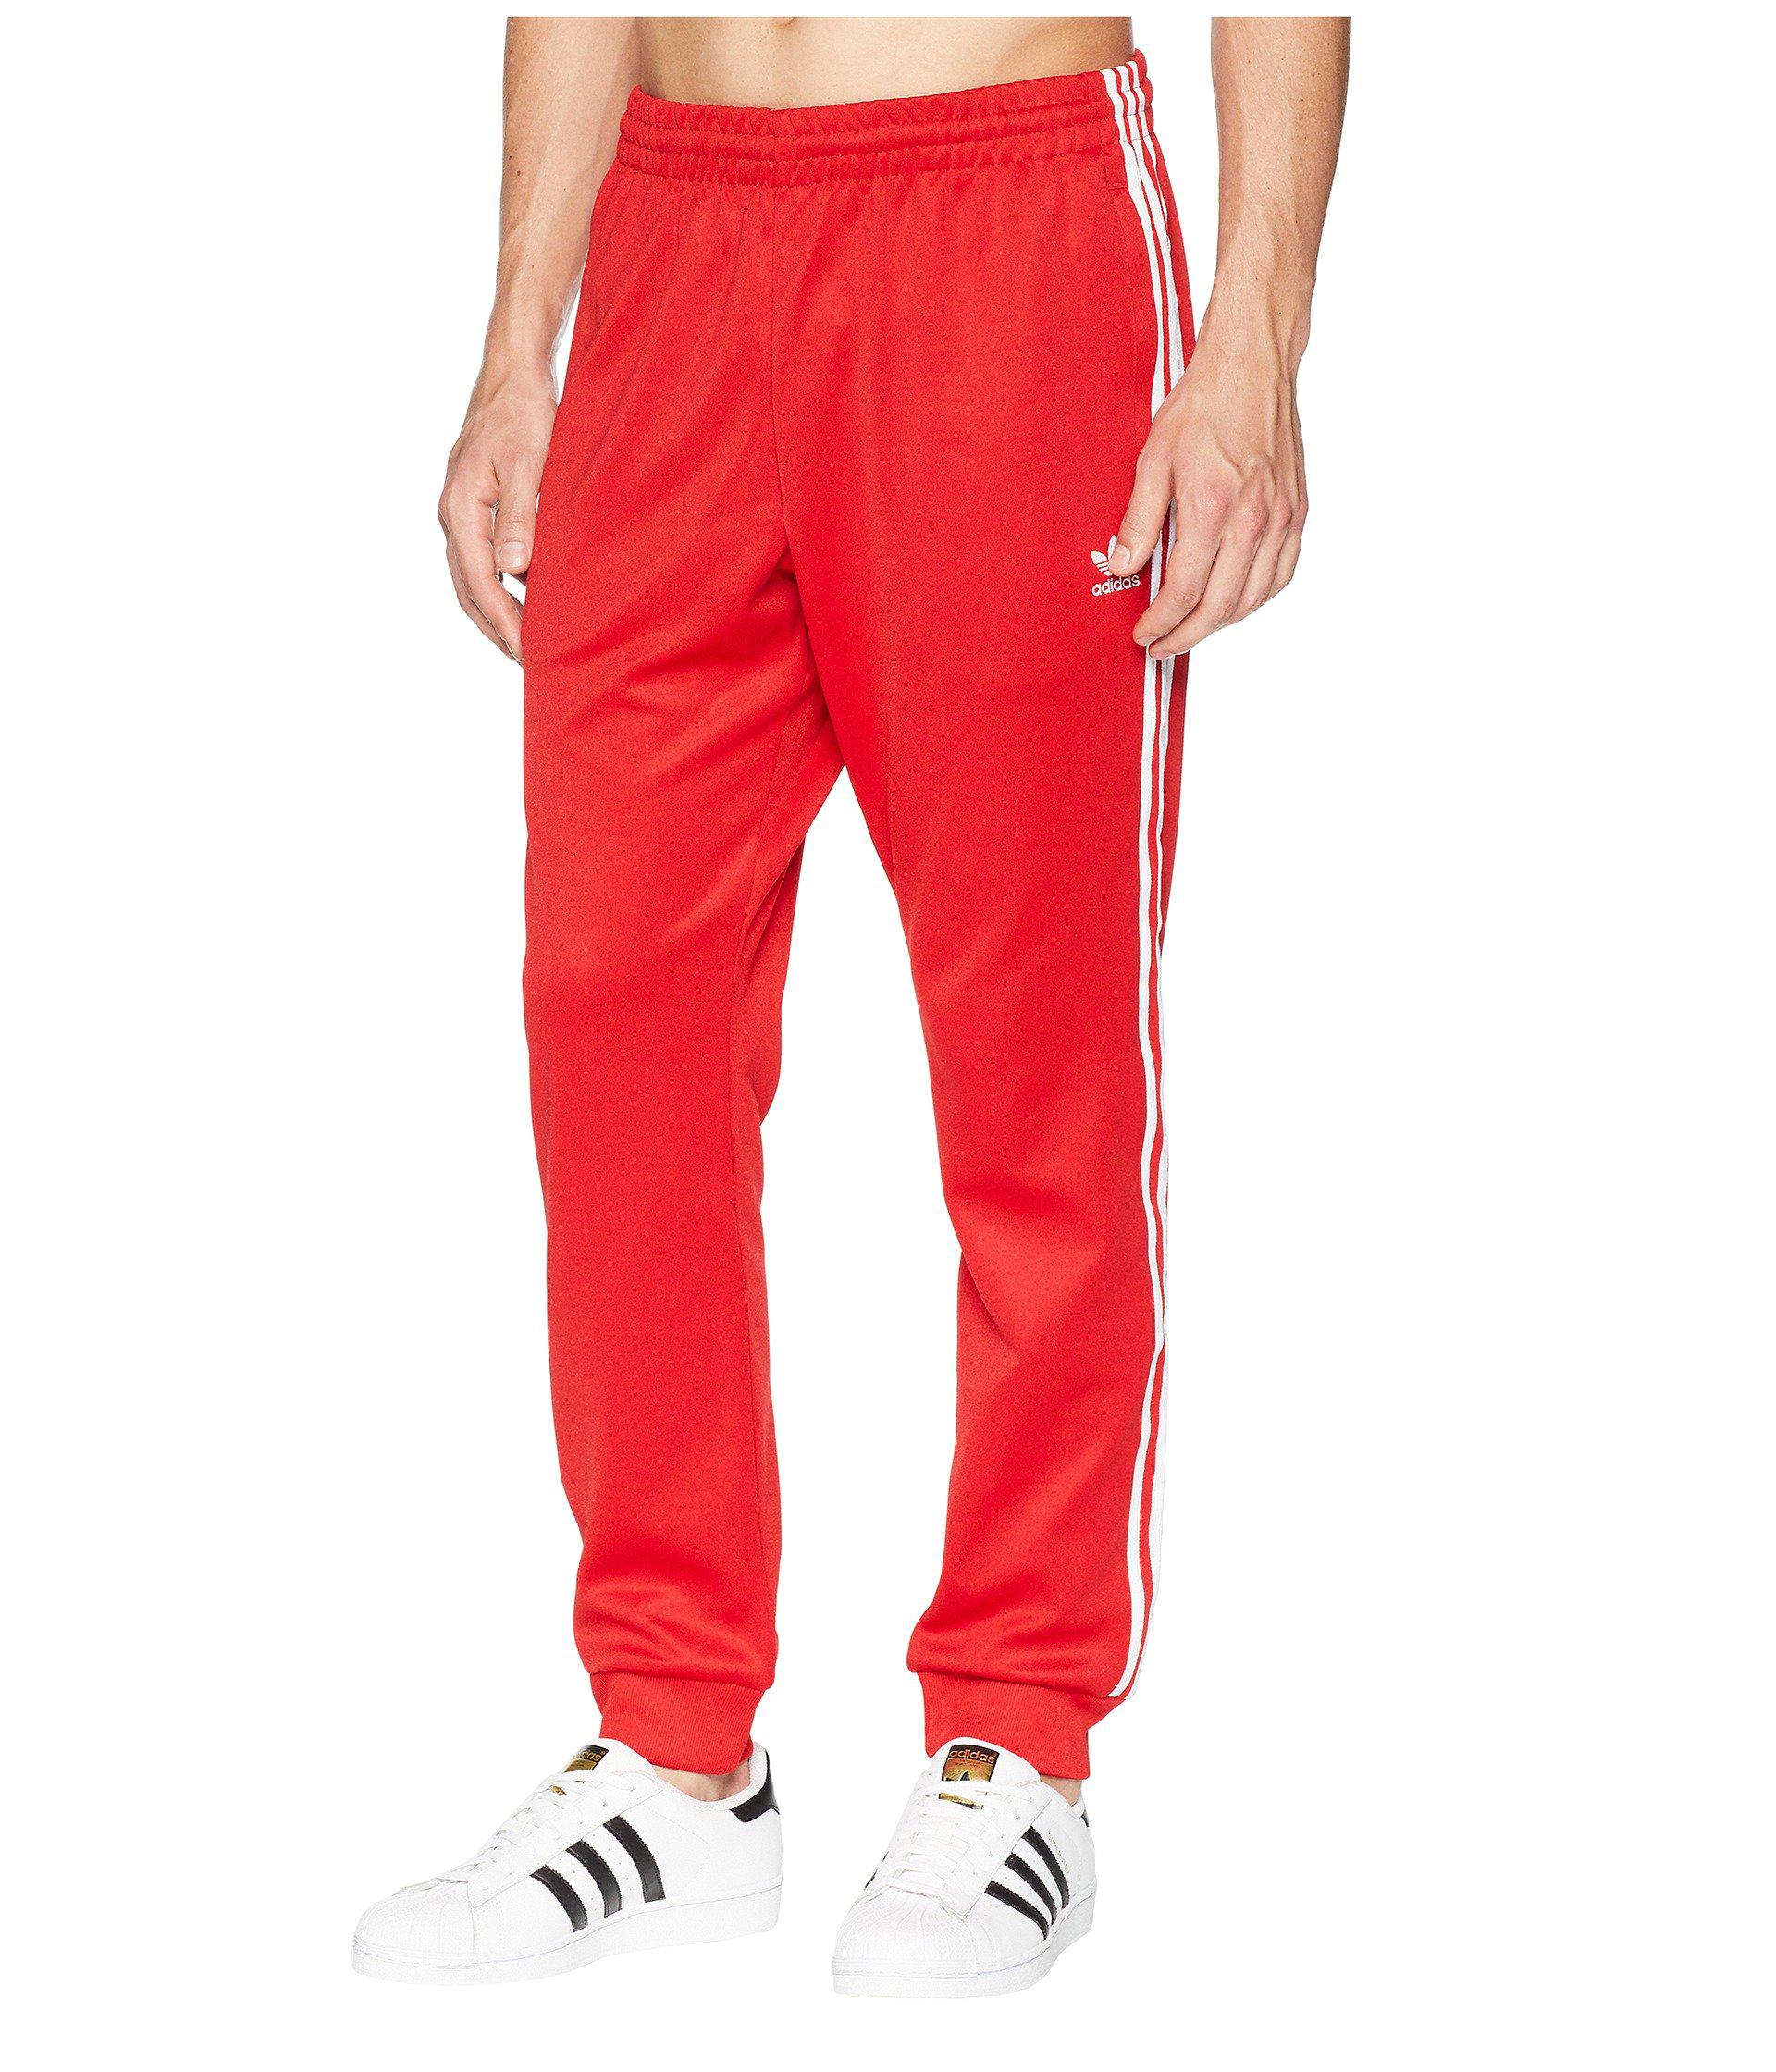 sst adidas red